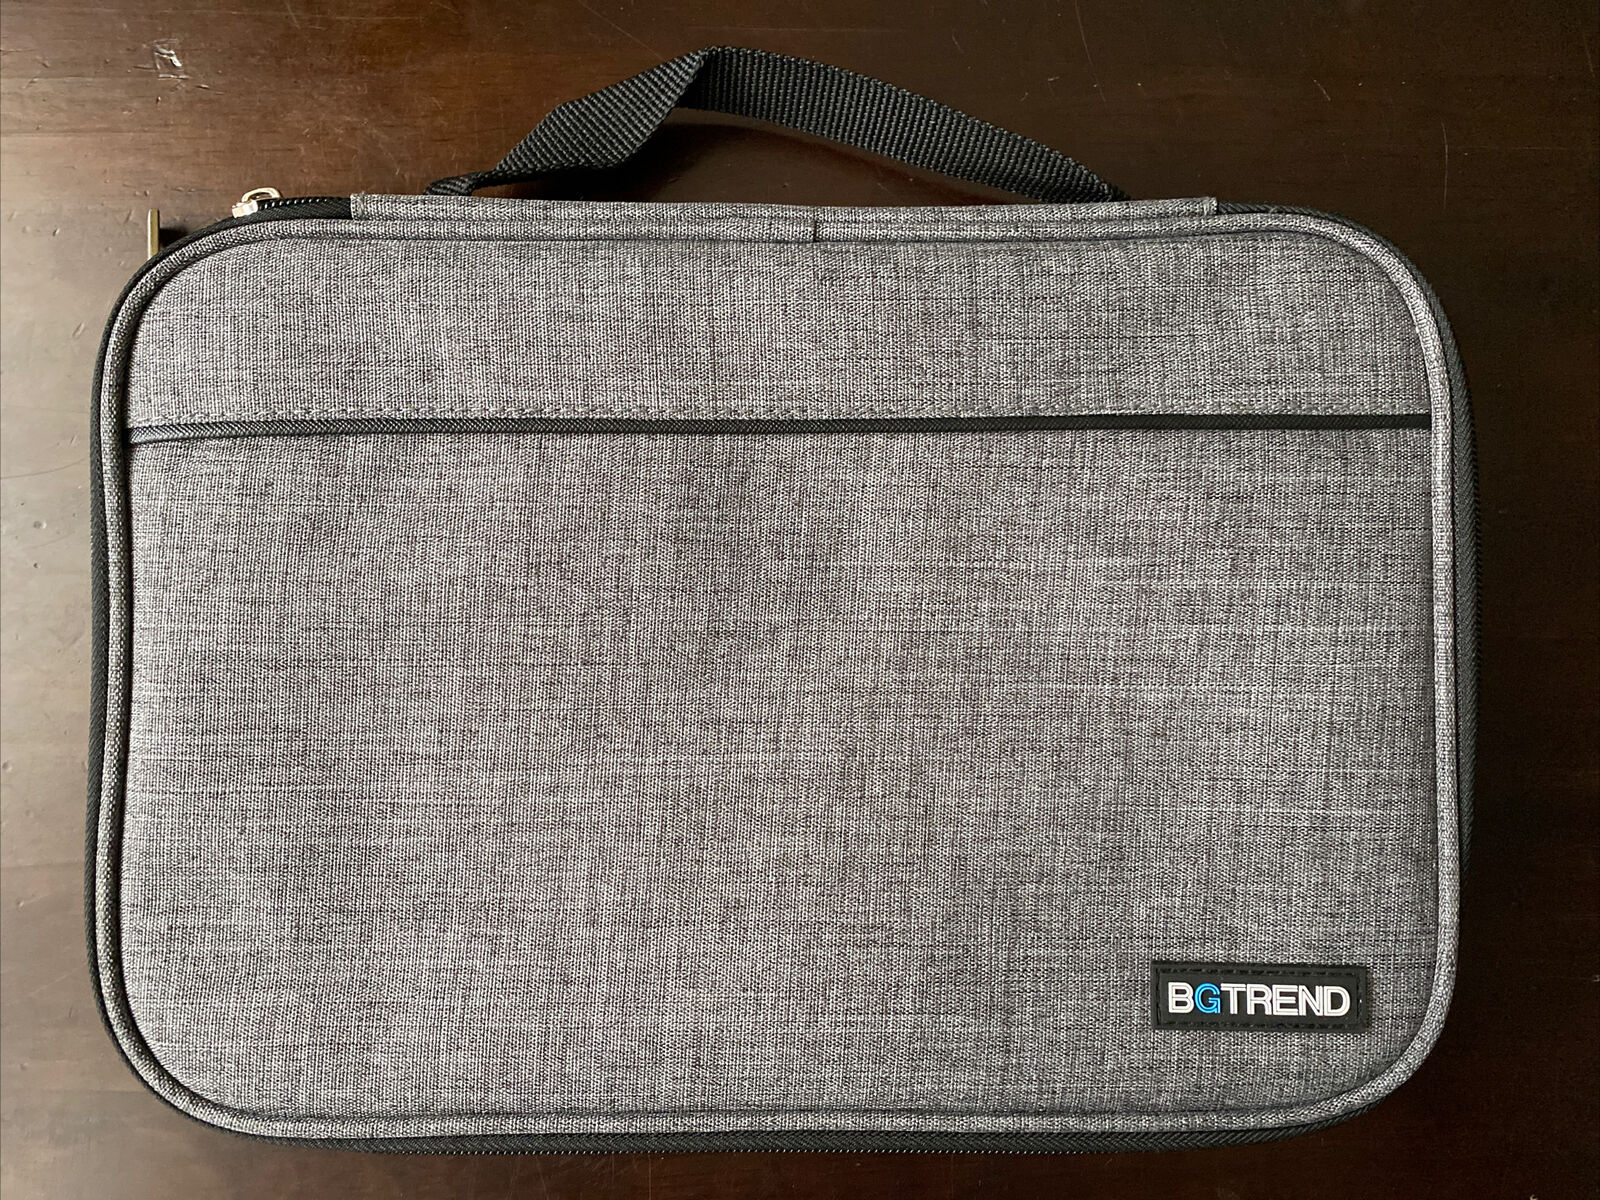 BG Trend Pad Carrying/ Storage Case Gray With Black Trim NEW without Box